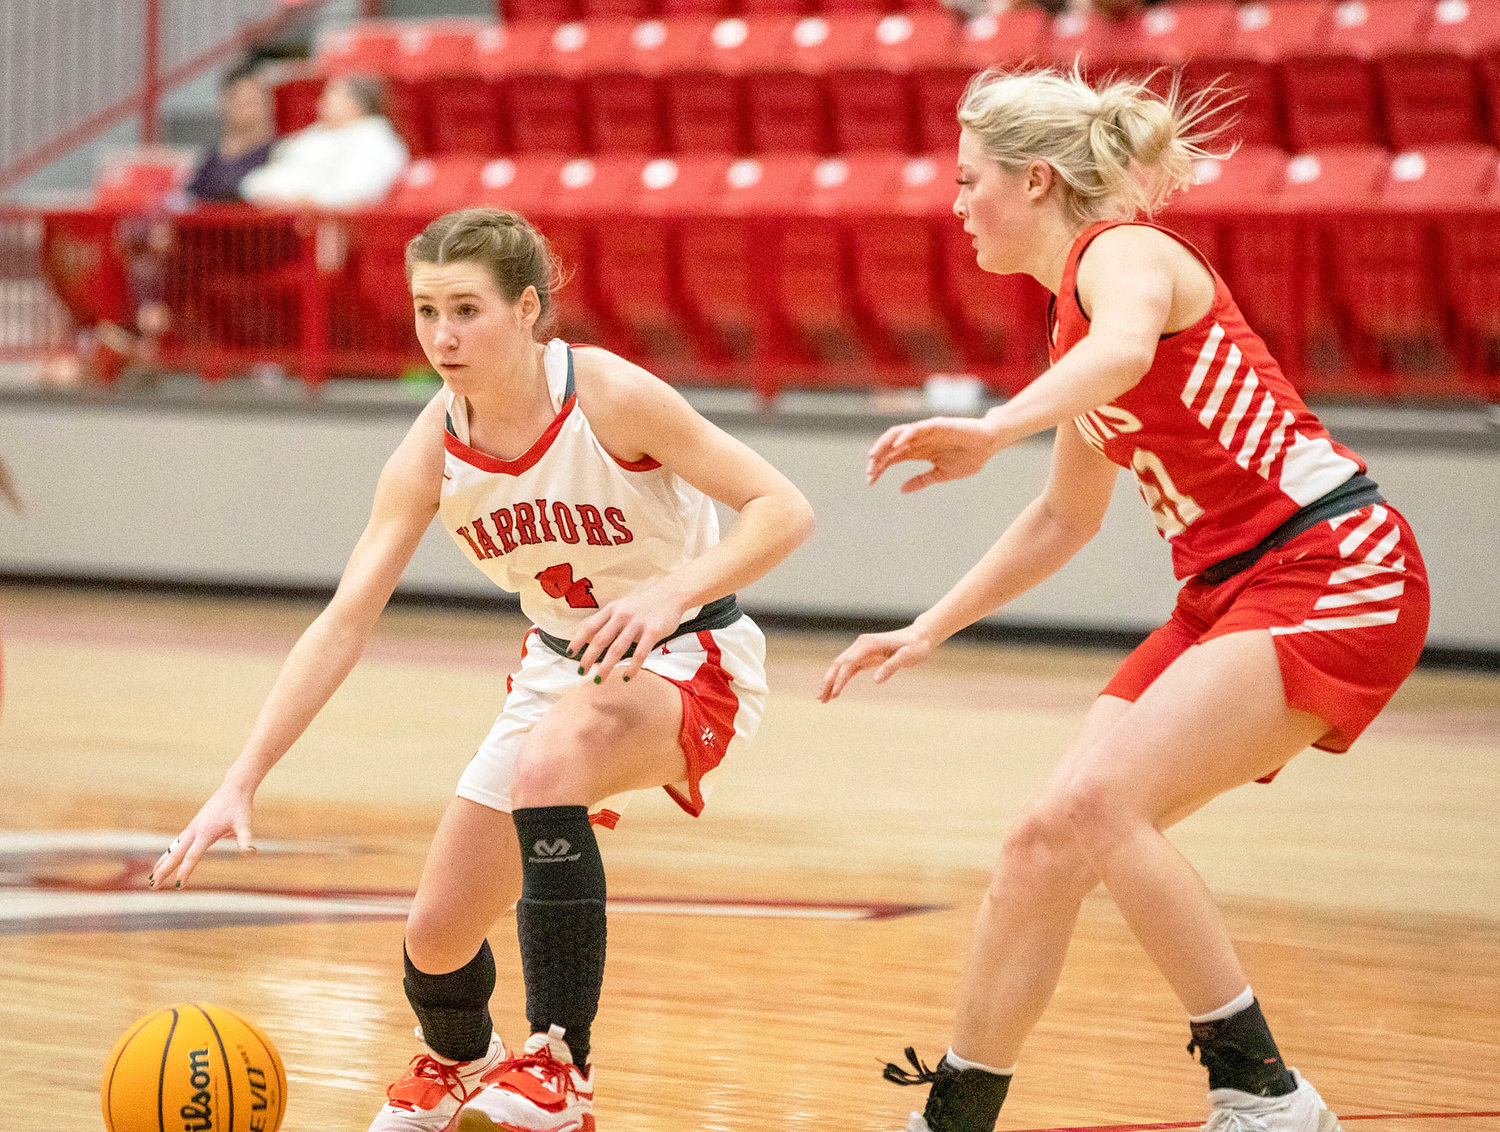 Washington freshman Rielyn Scheffe handles the ball for the Warriors against Davis. Washington was defeated 34-32. Washington plays Chisholm Saturday at 6:30 p.m. in the District tournament.